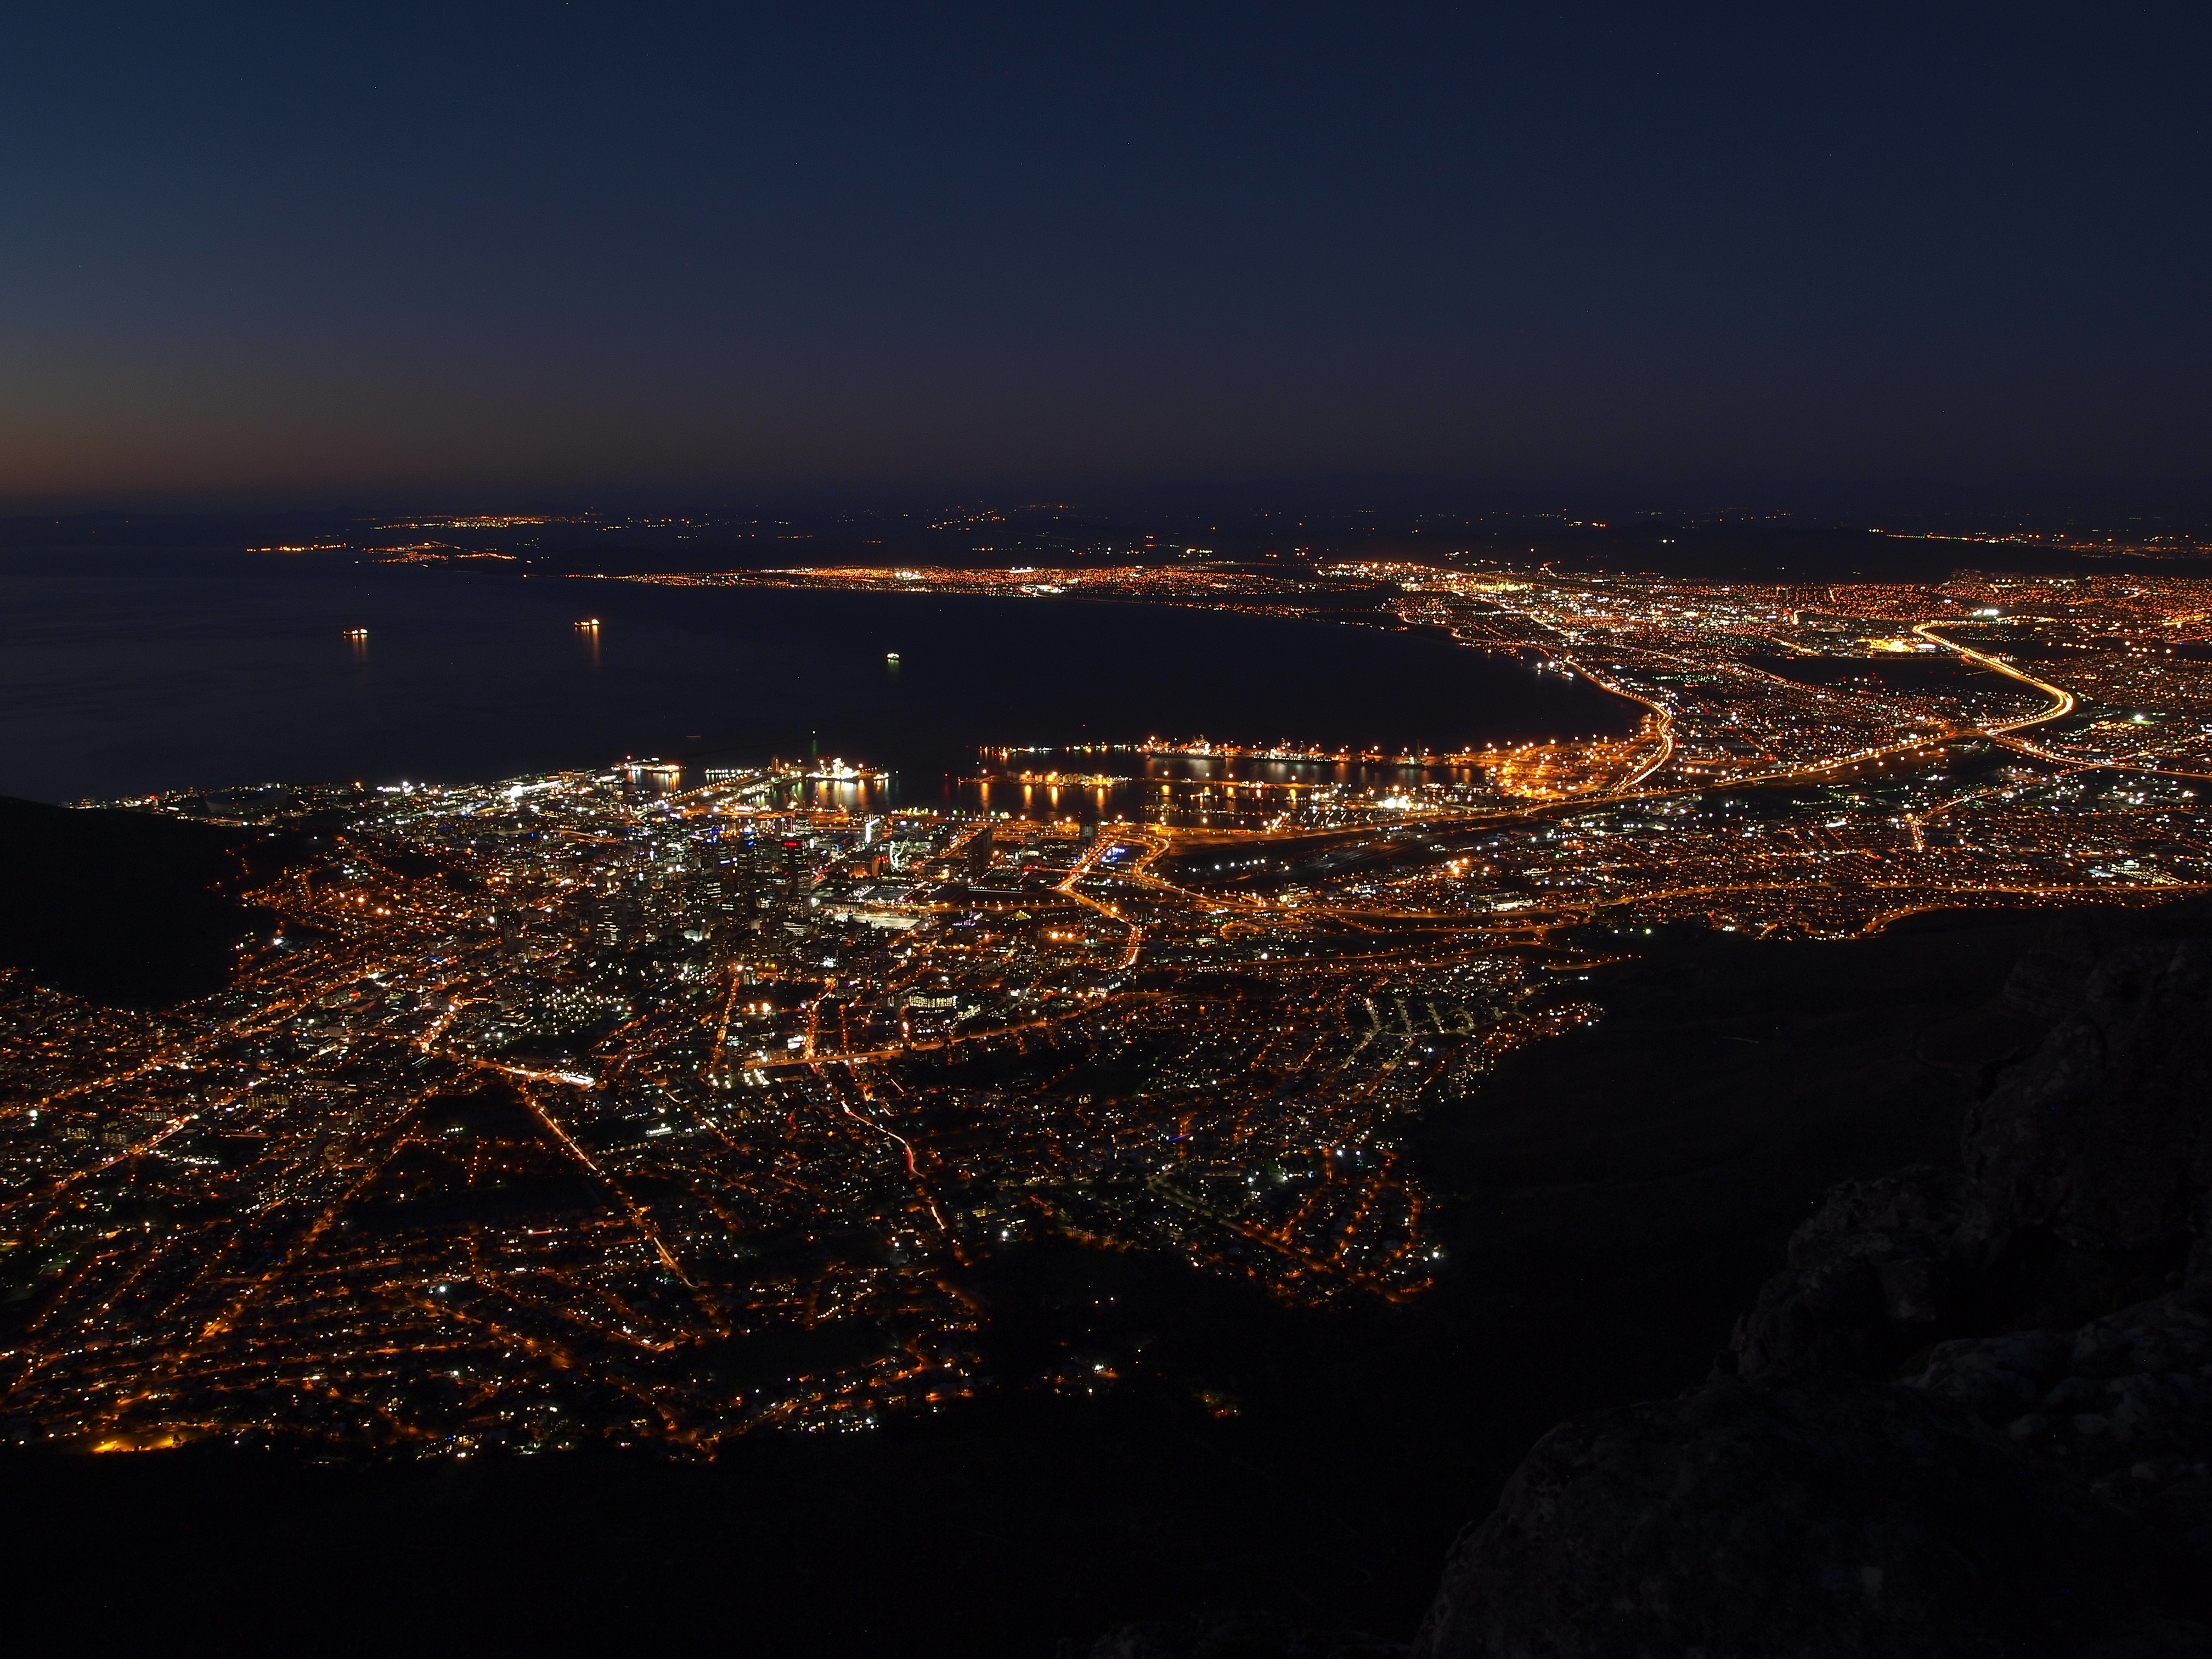 Cape Town at night (11)